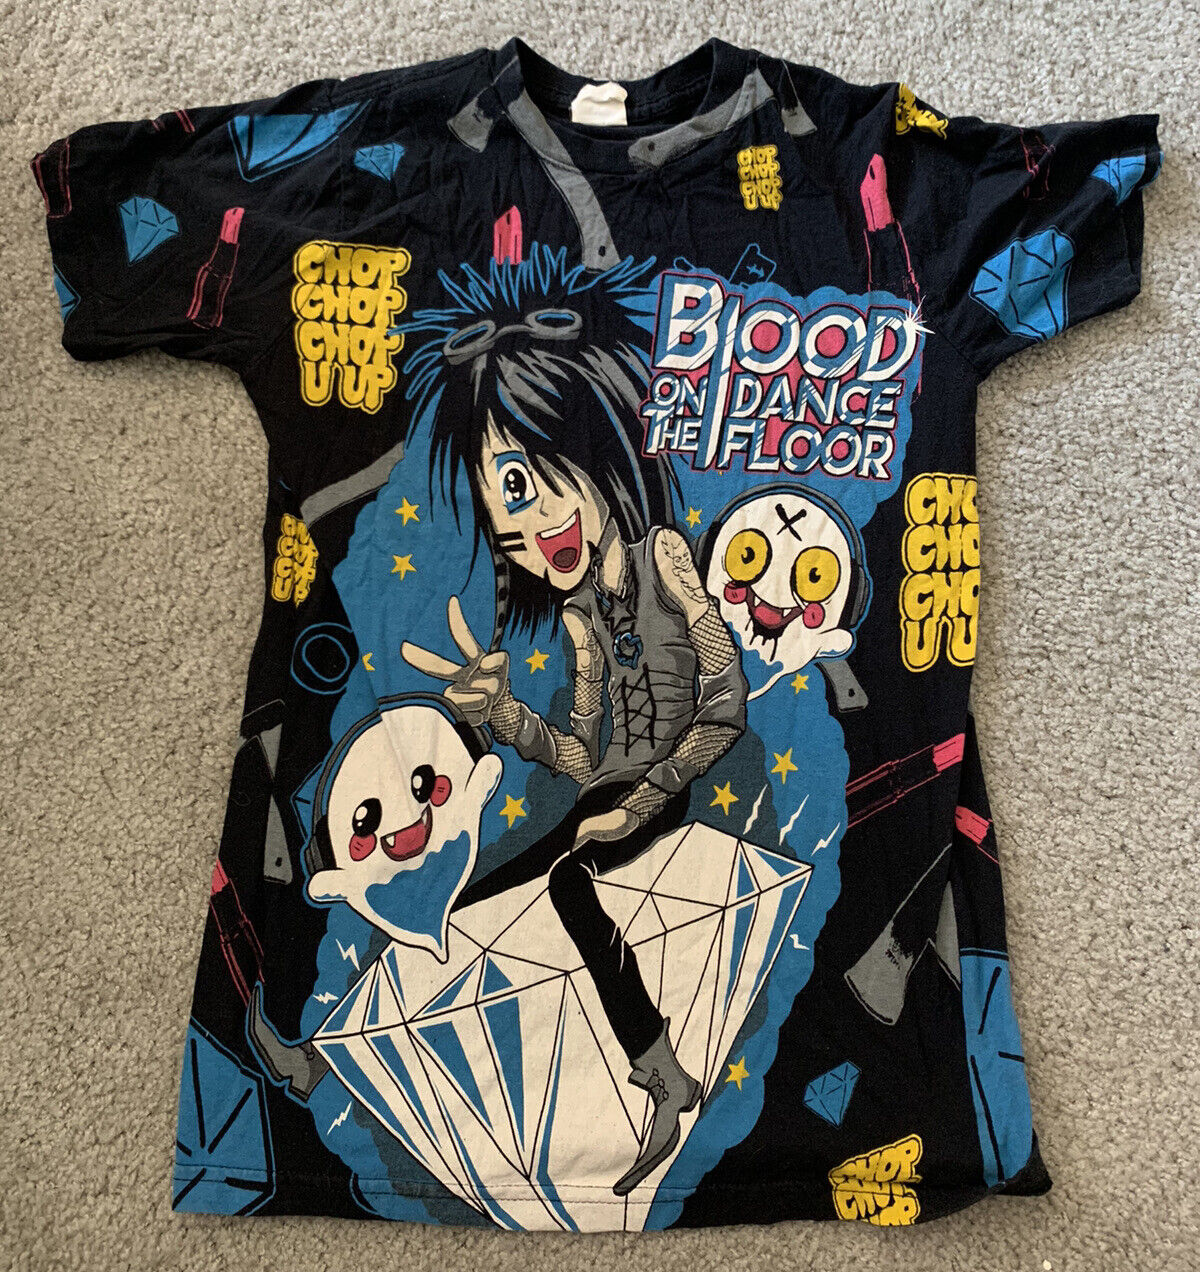 Applied Formation ferry RARE GUC XS Blood on the Dance Floor Chop You Up Diamond BOTDF Concert  TShirt | eBay